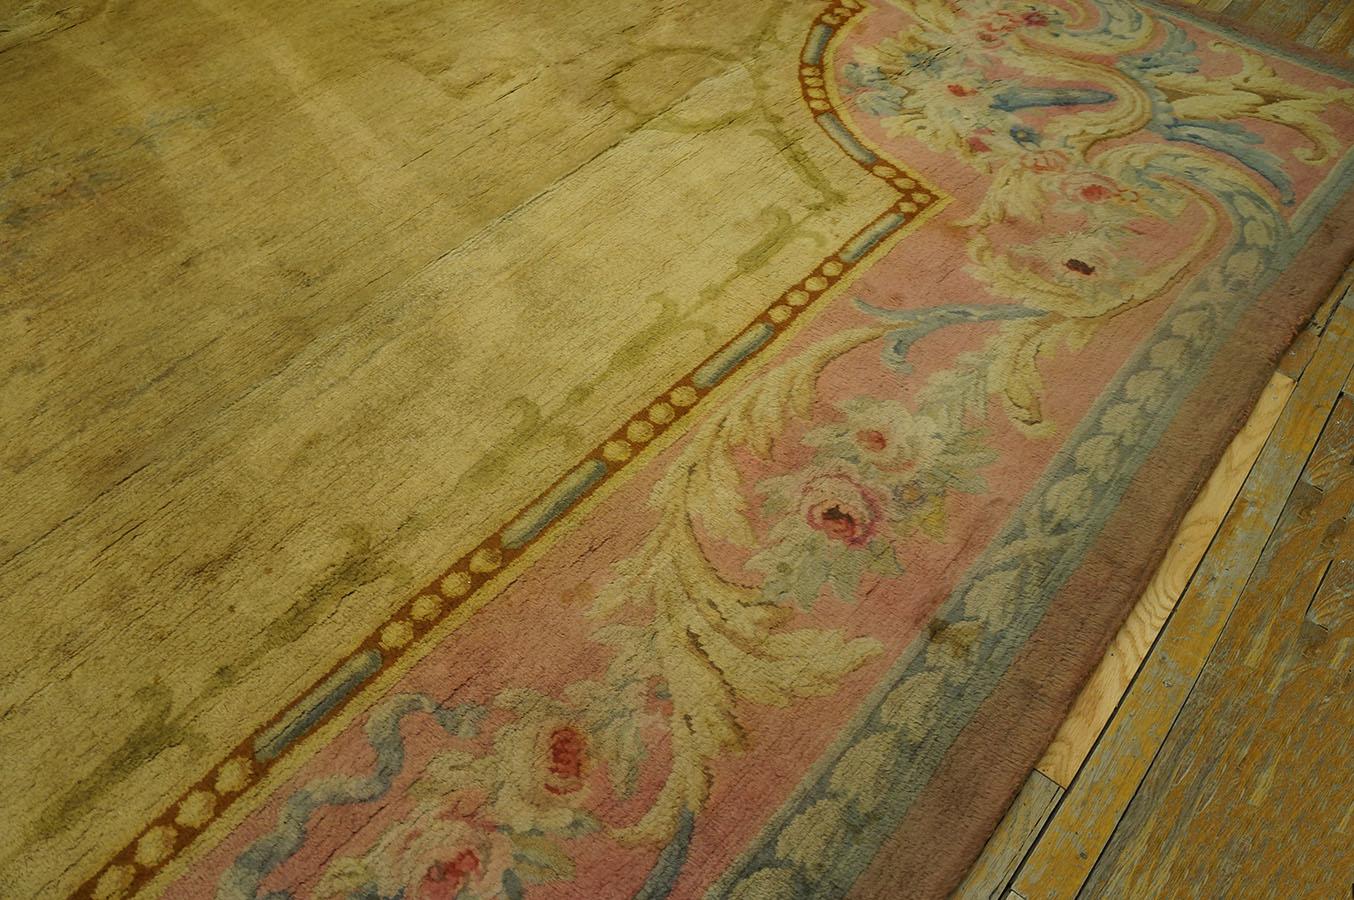 Late 19th Century French Savonnerie Carpet (12' 3'' x 21' - 375 x 640 cm ) For Sale 6